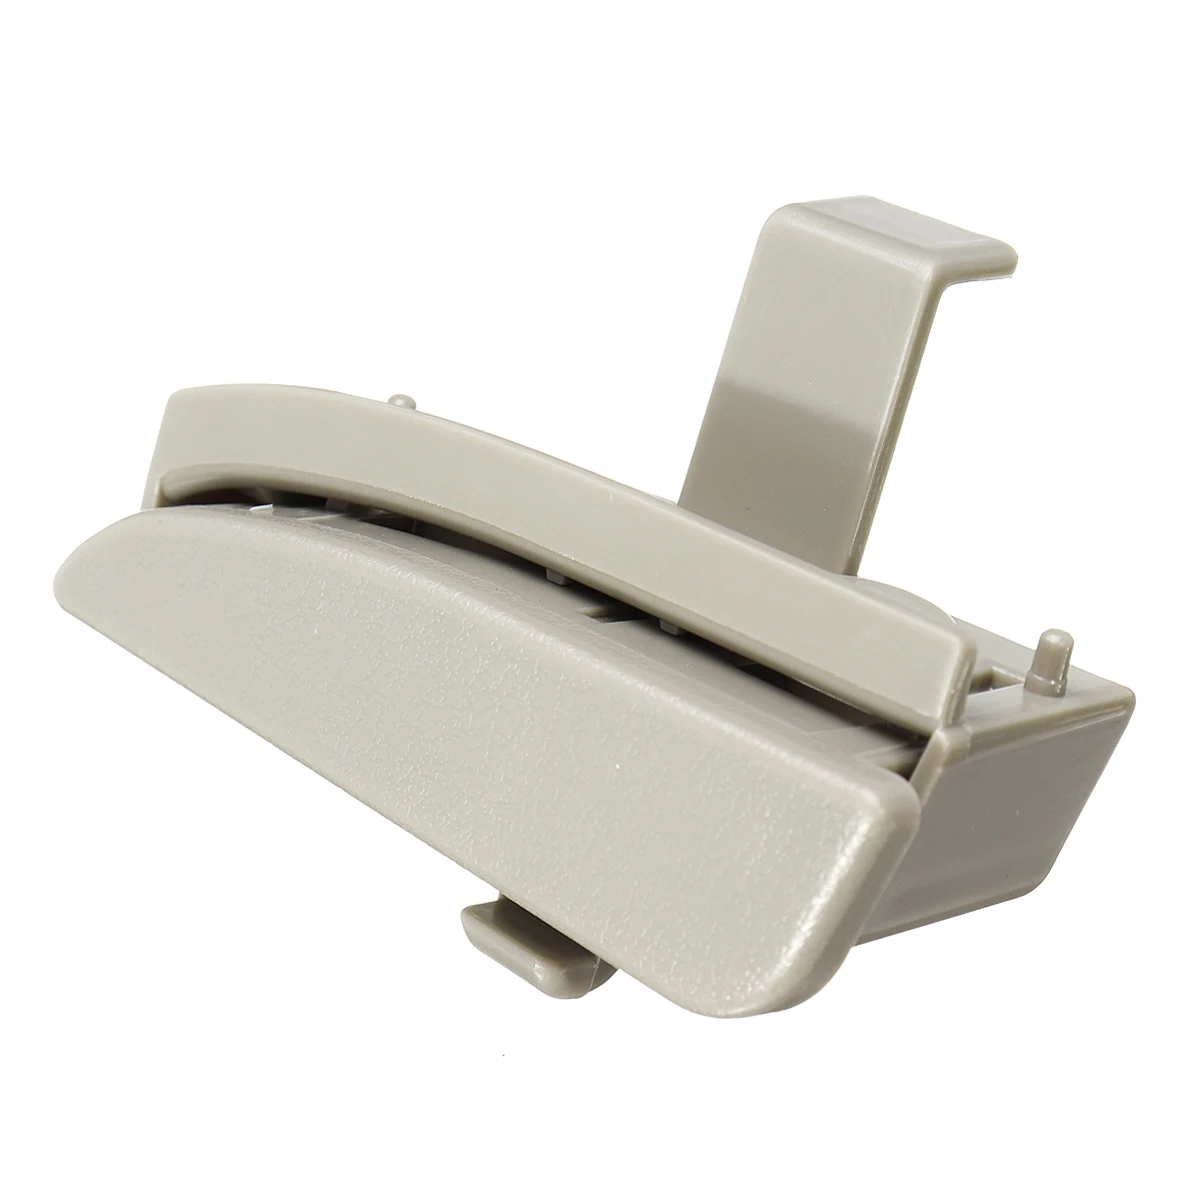 Details about   New Gray Center Console Latch Latches Lid Lock Fit For Toyota Tacoma 2005-2012 